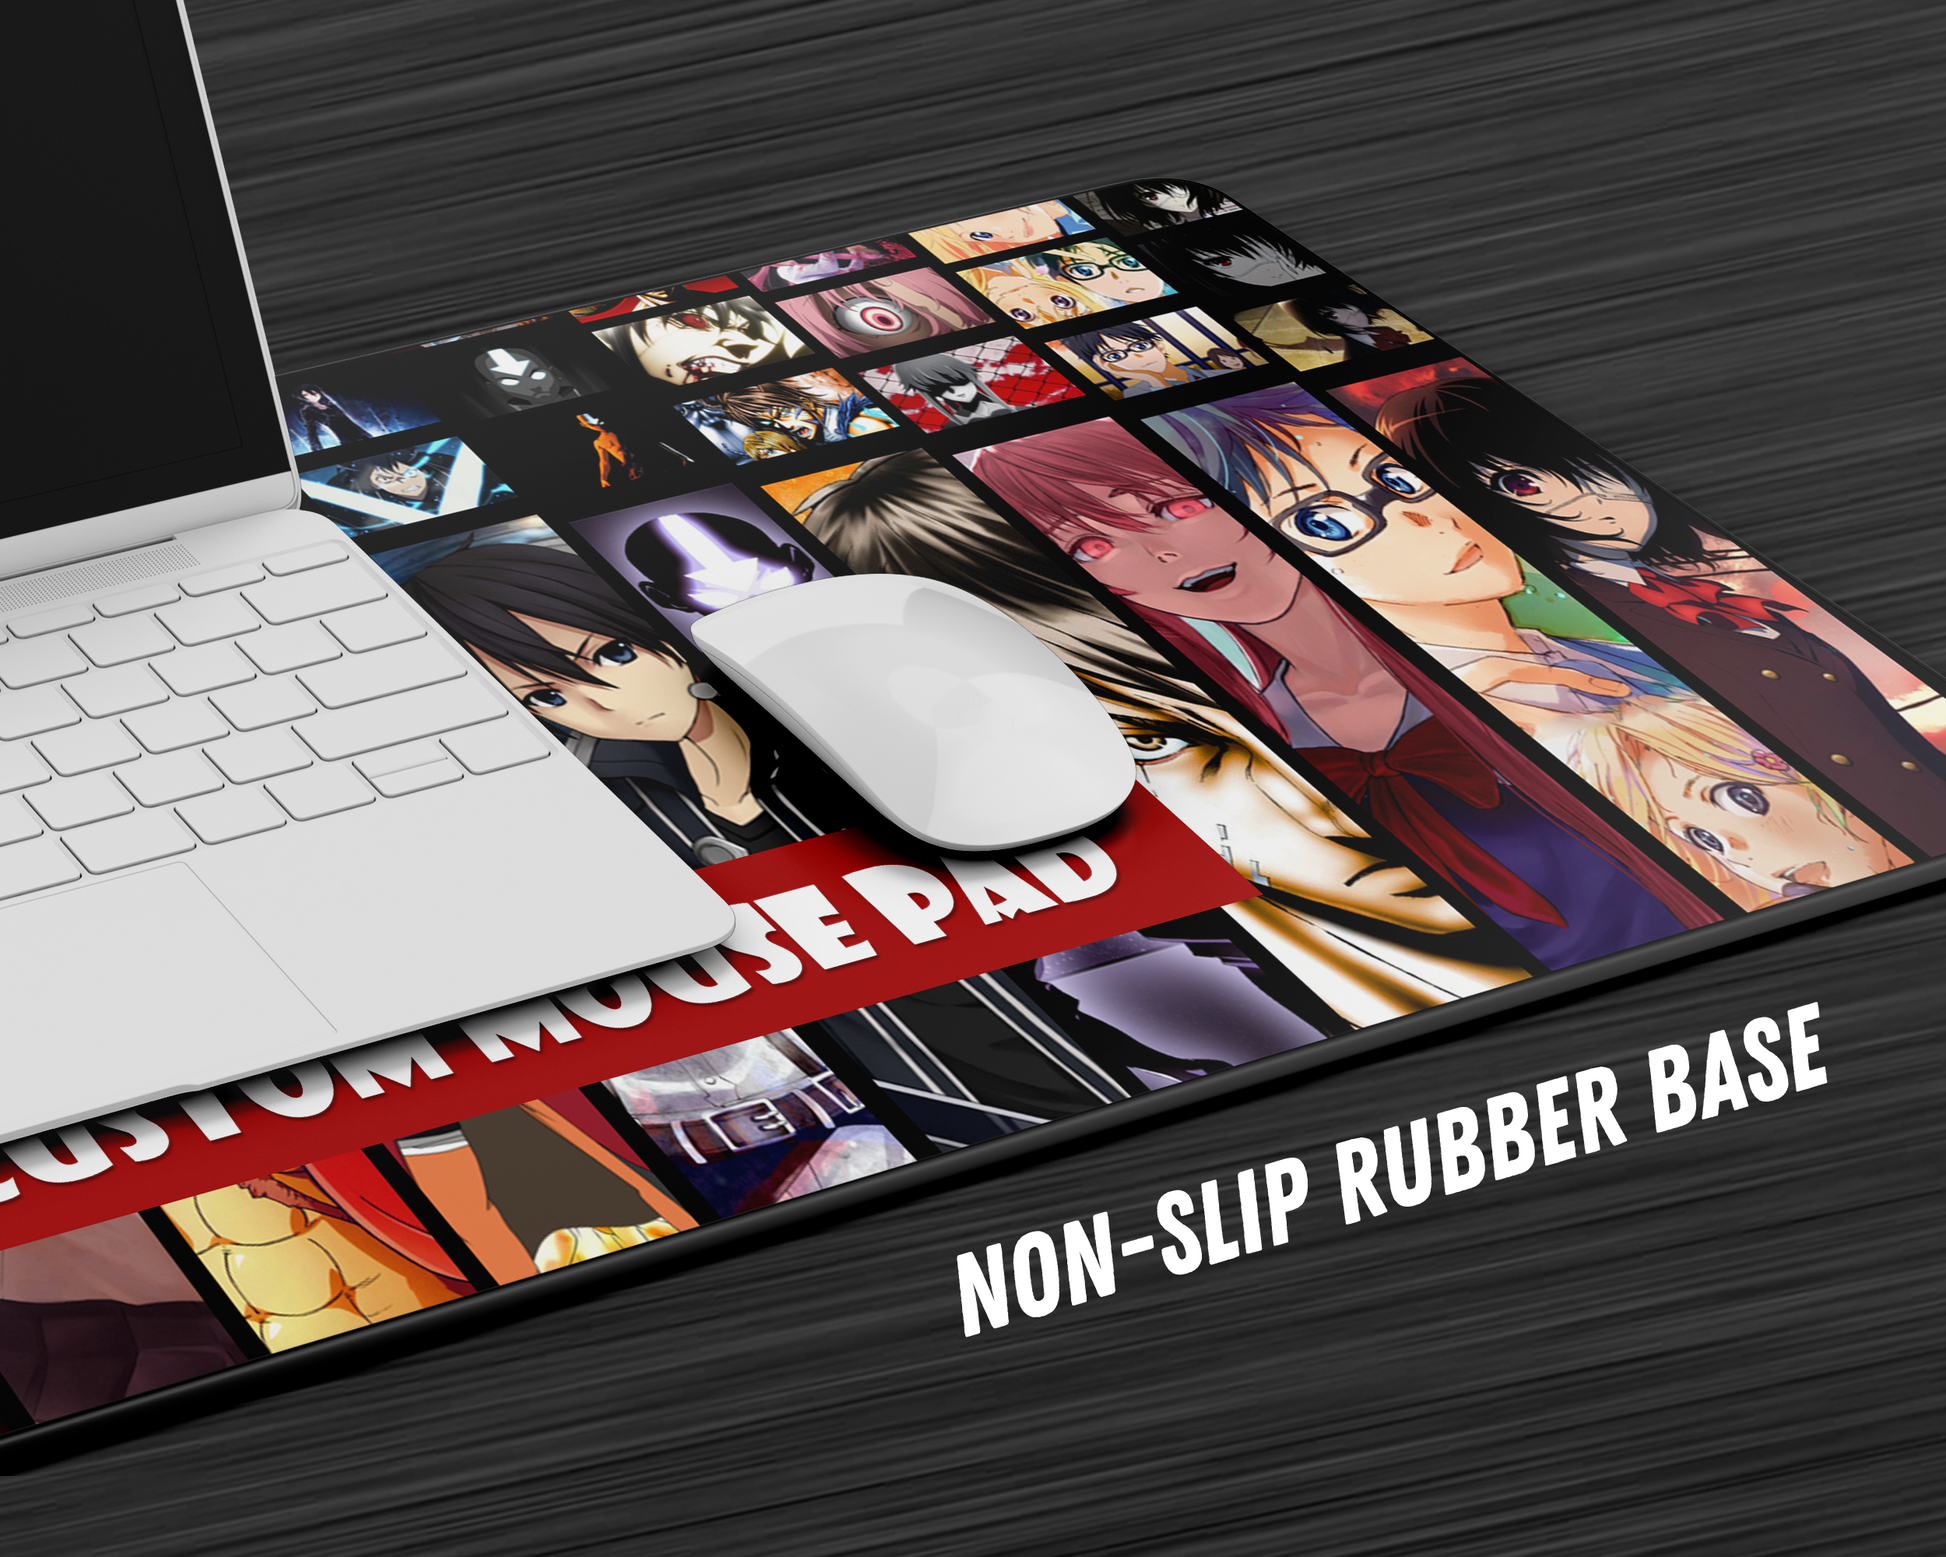 Anime Town Creations Mouse Pad Create Your Own Gaming Mouse Pad Accessories - Custom Custom Gaming Mouse Pad